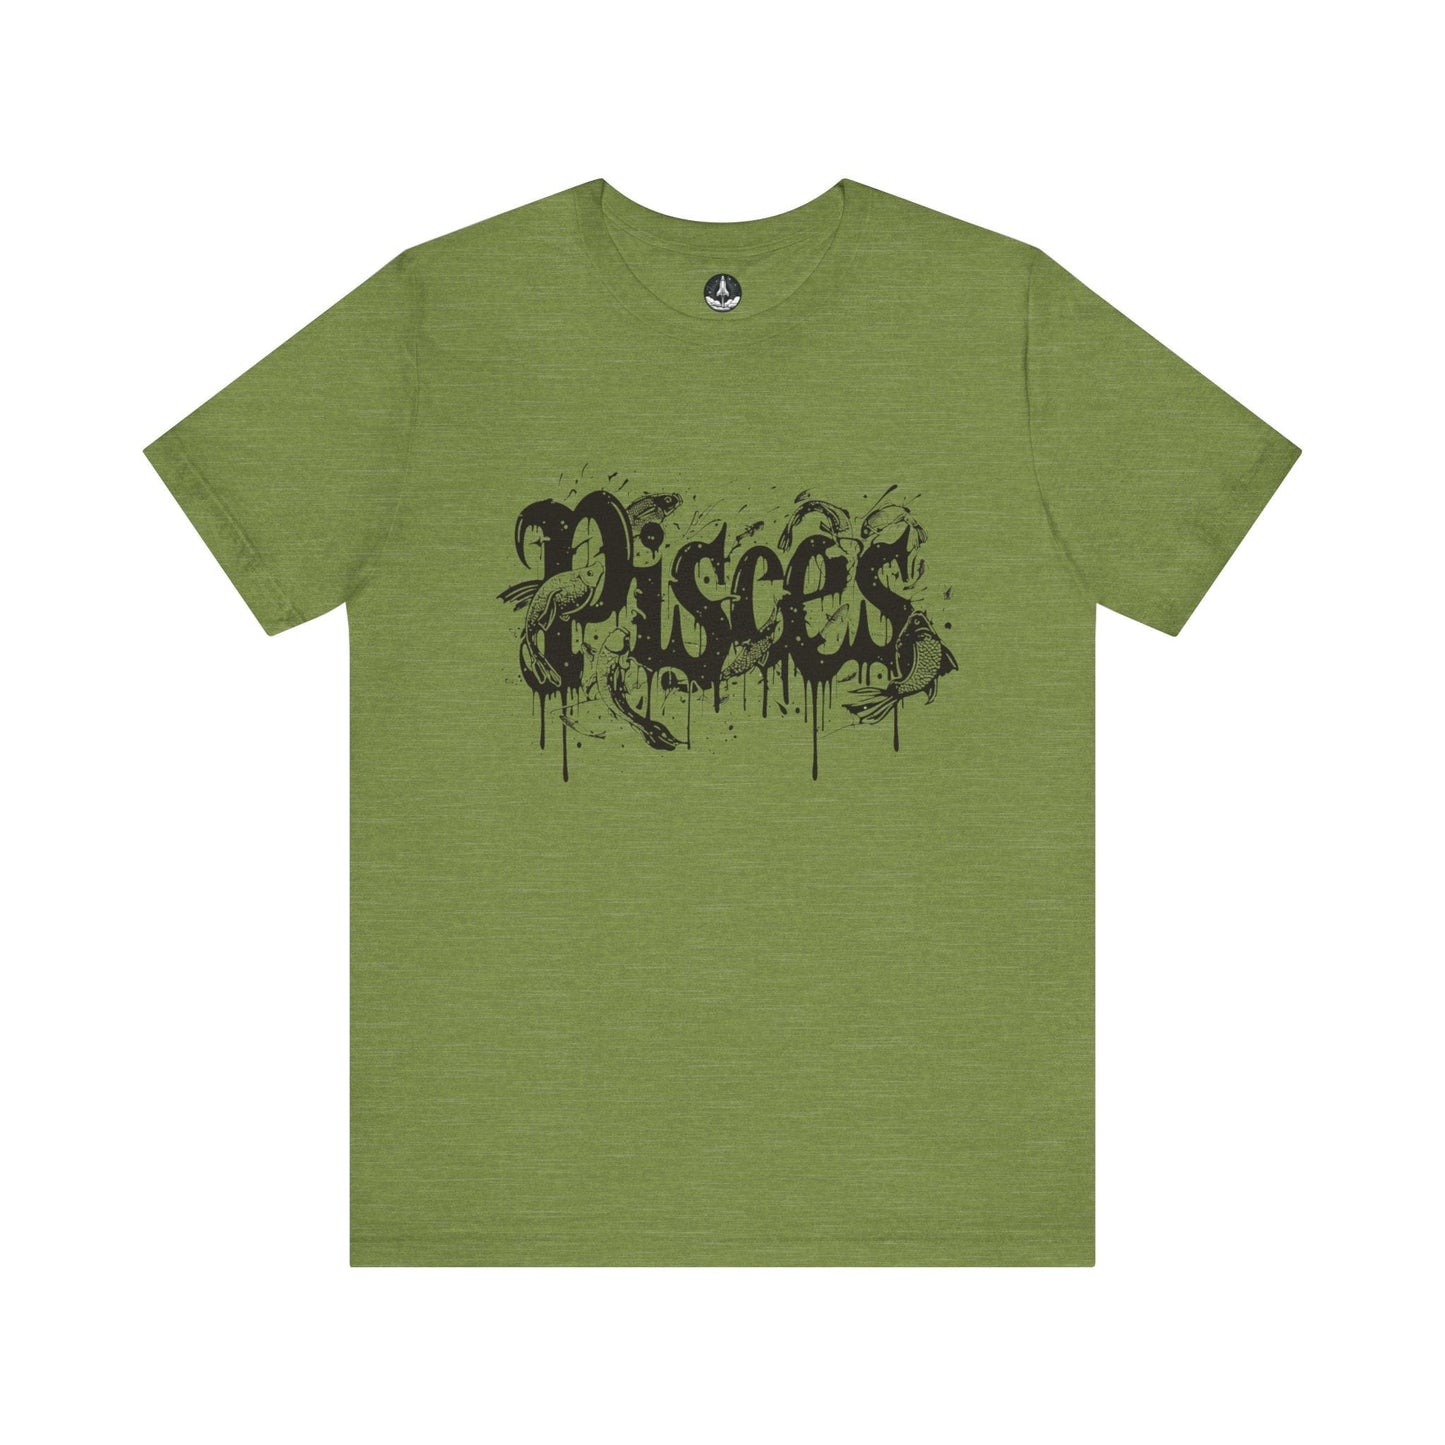 T-Shirt Heather Green / S Deep Dive Pisces TShirt: Immerse in the Artistic Tide